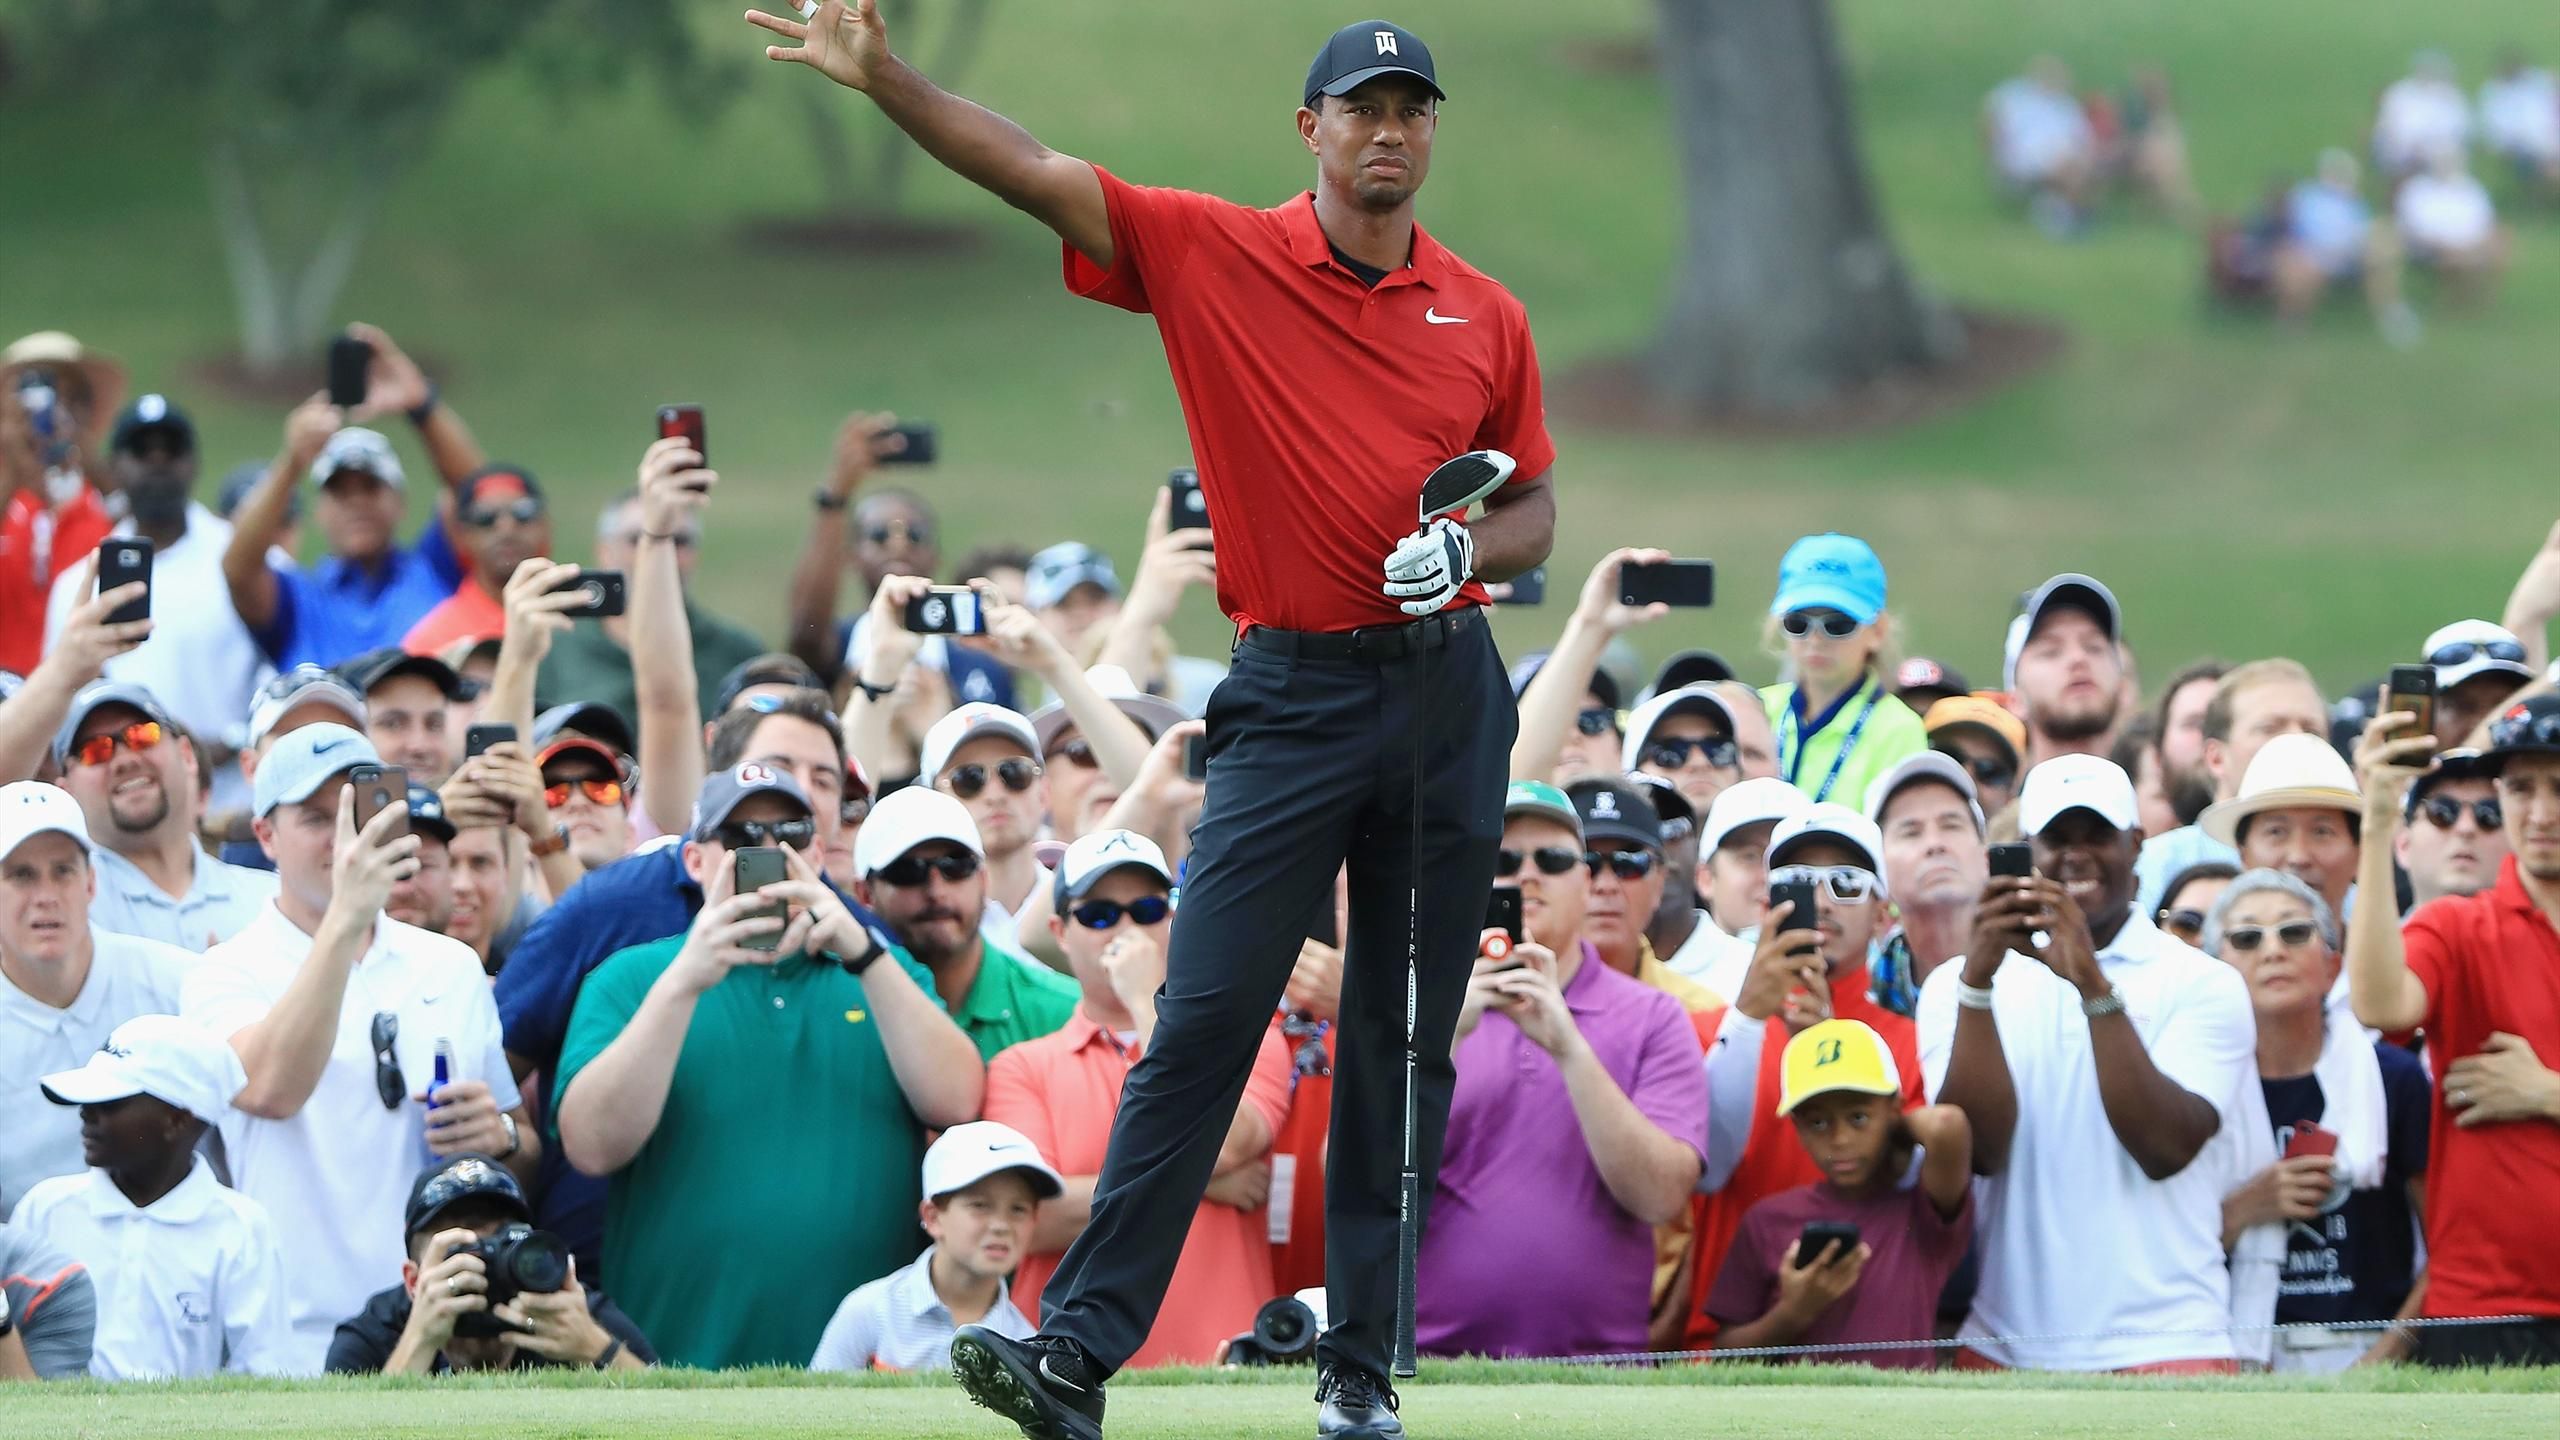 Golf news 2020, The Masters, Tiger Woods, Ian Poulter, win 2019, greatest  comeback, book, biography